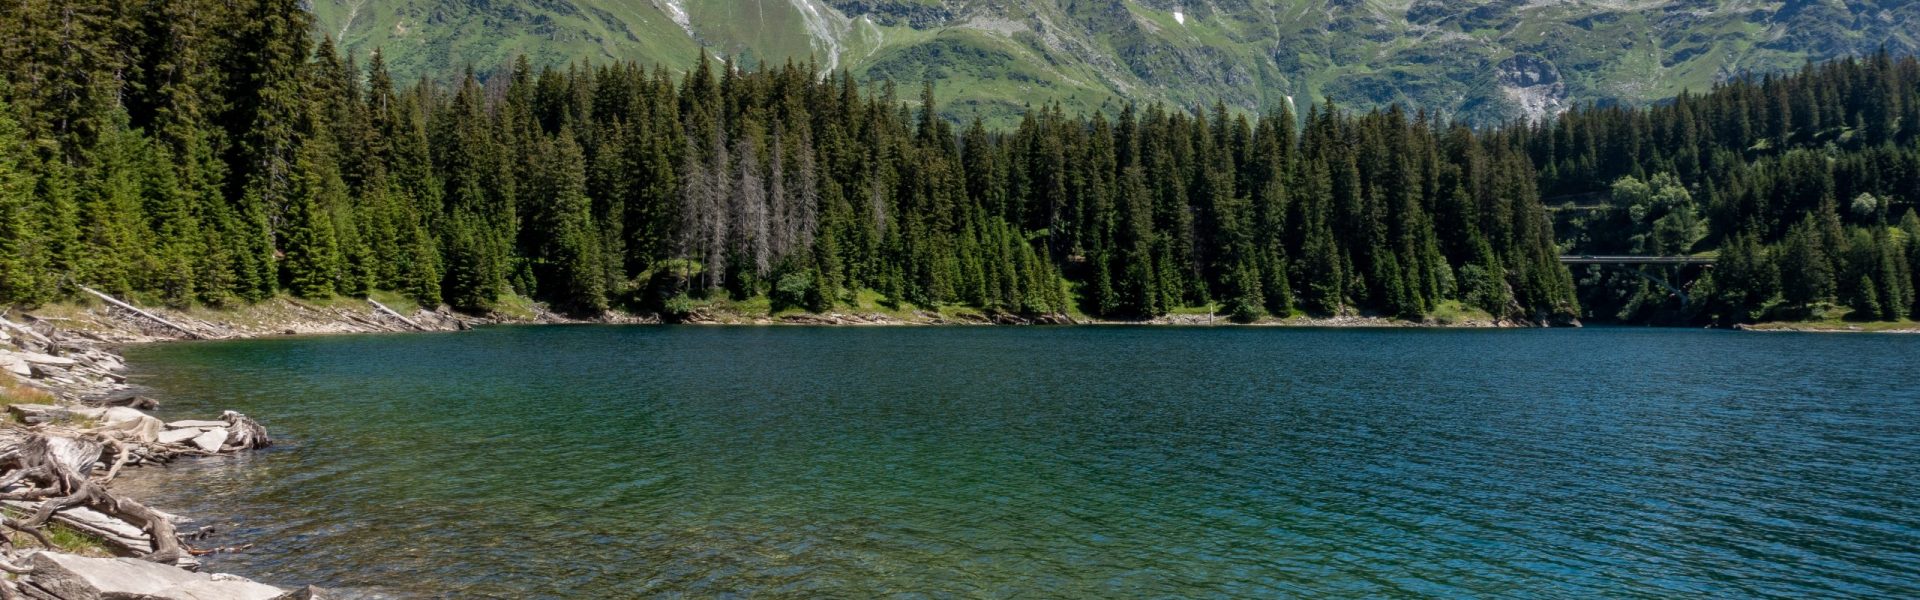 Lake with forest and mountain in background